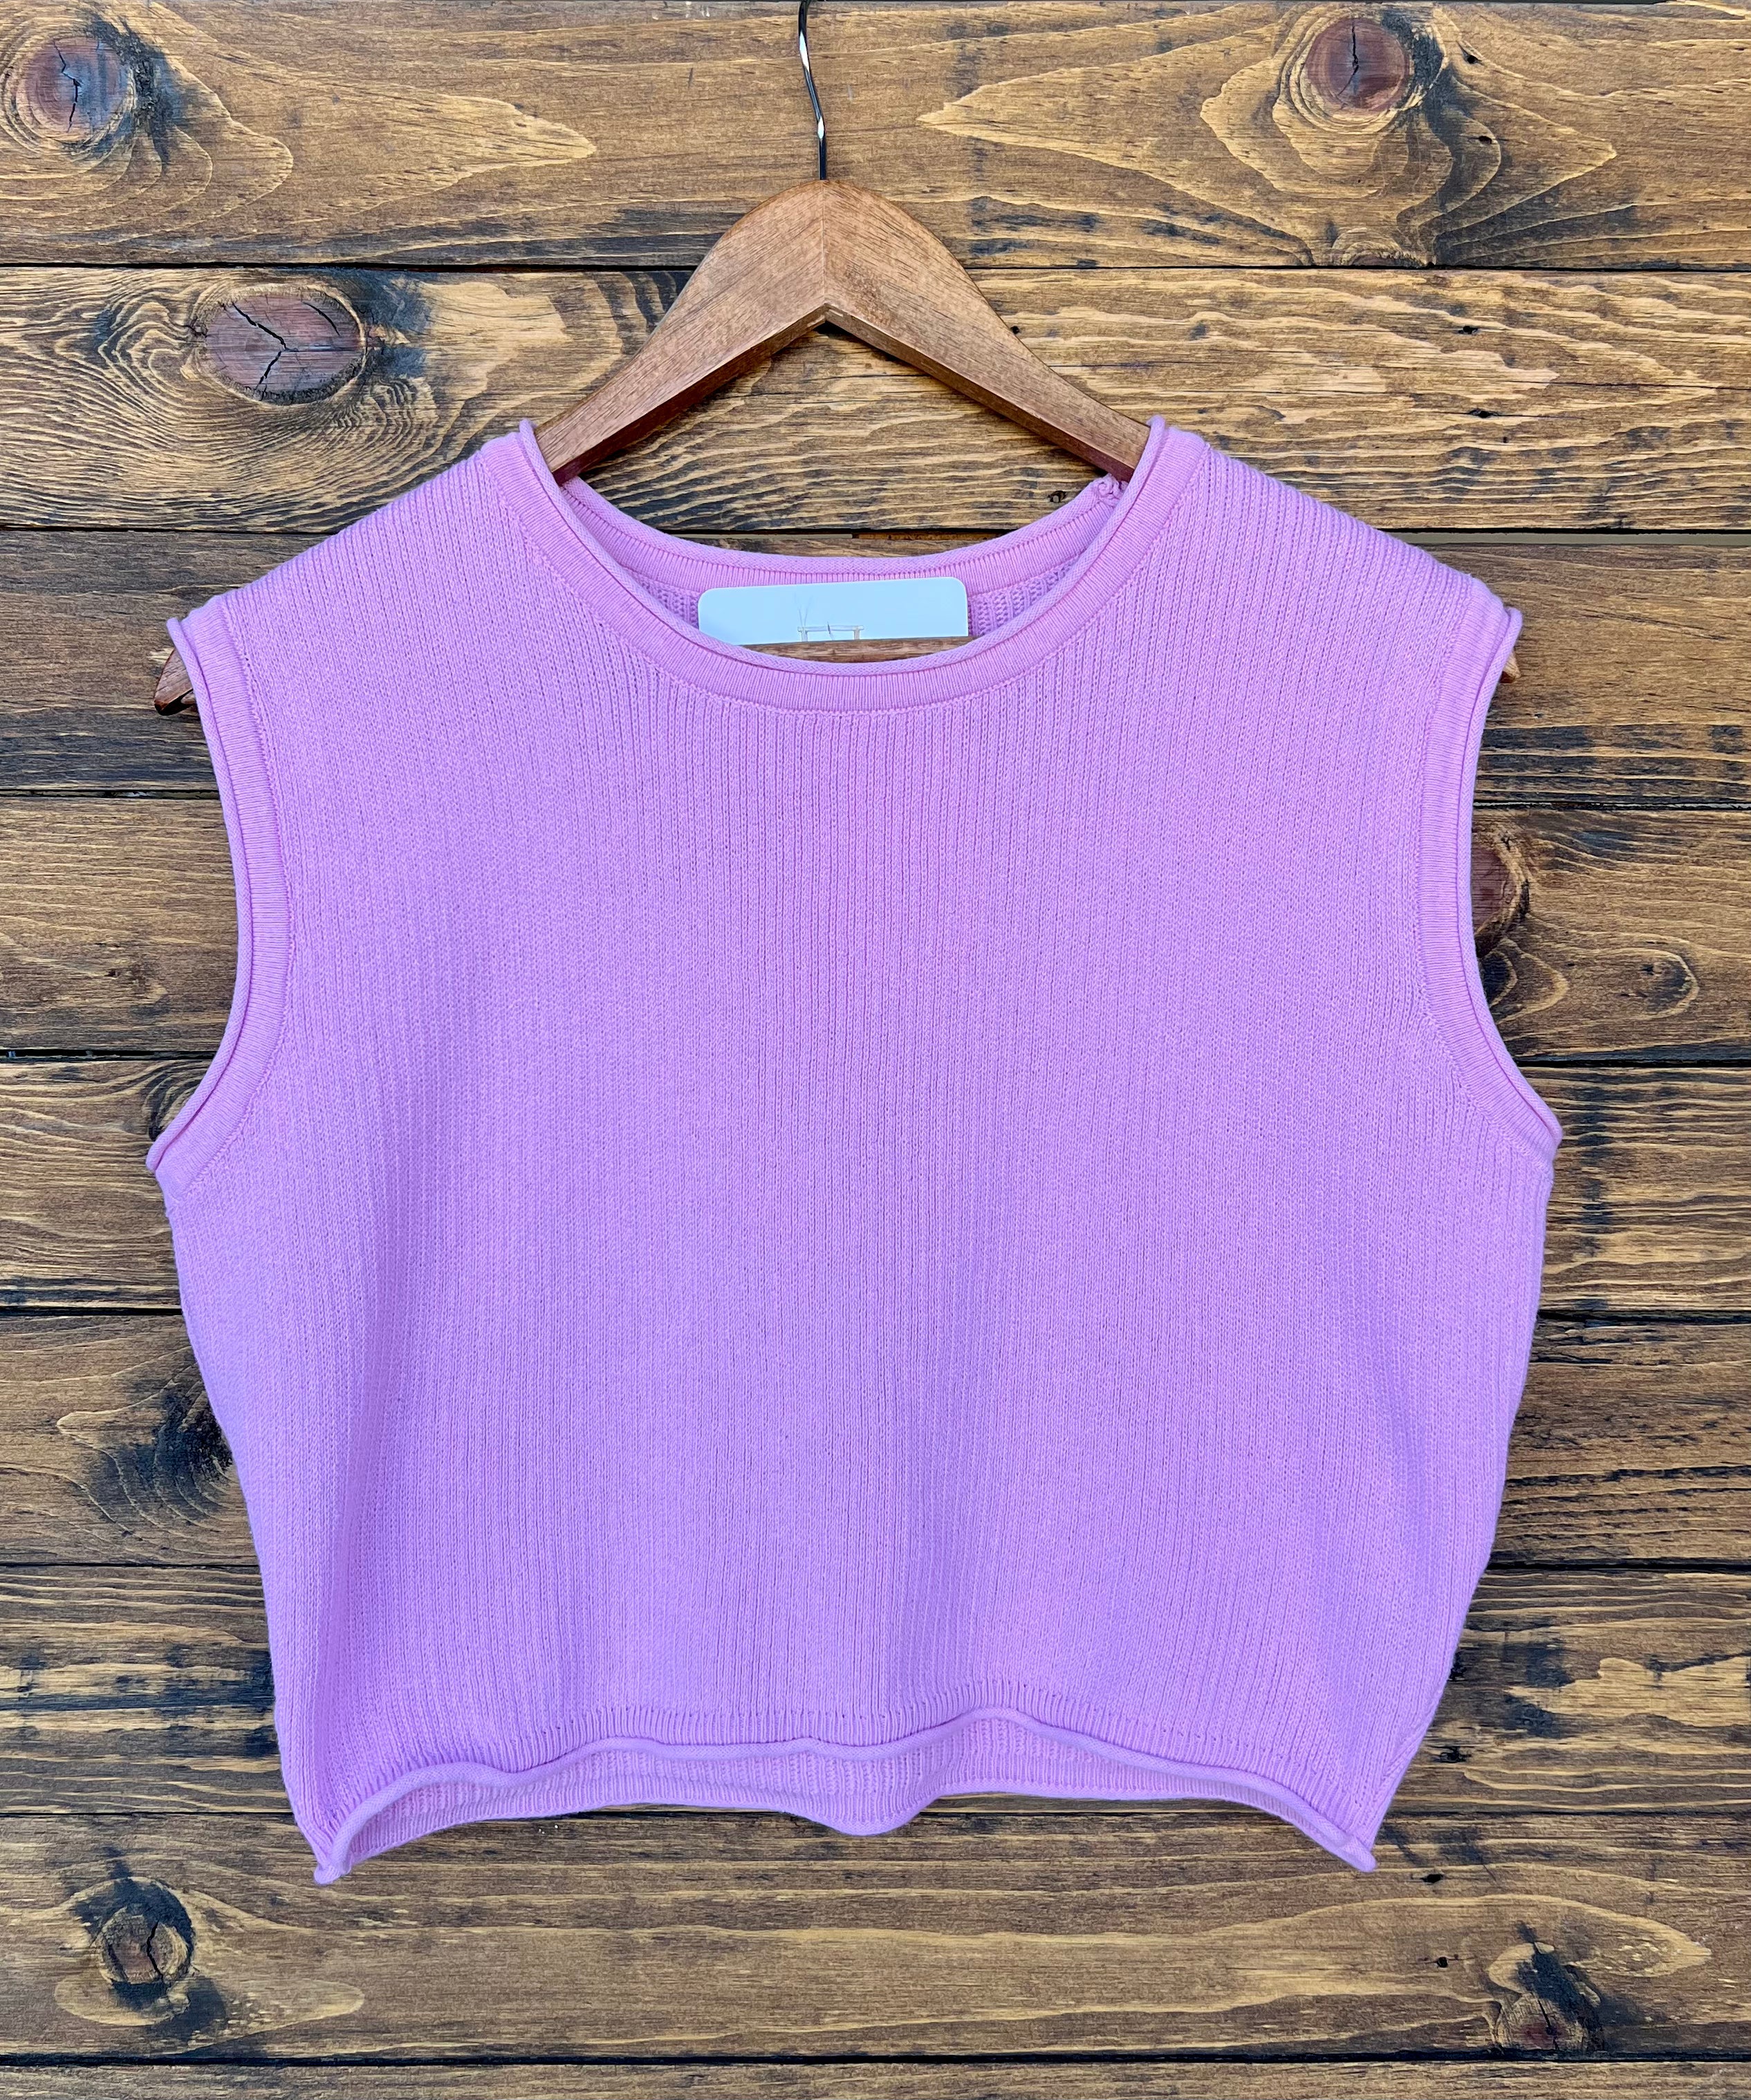 The Blossom Knit Top